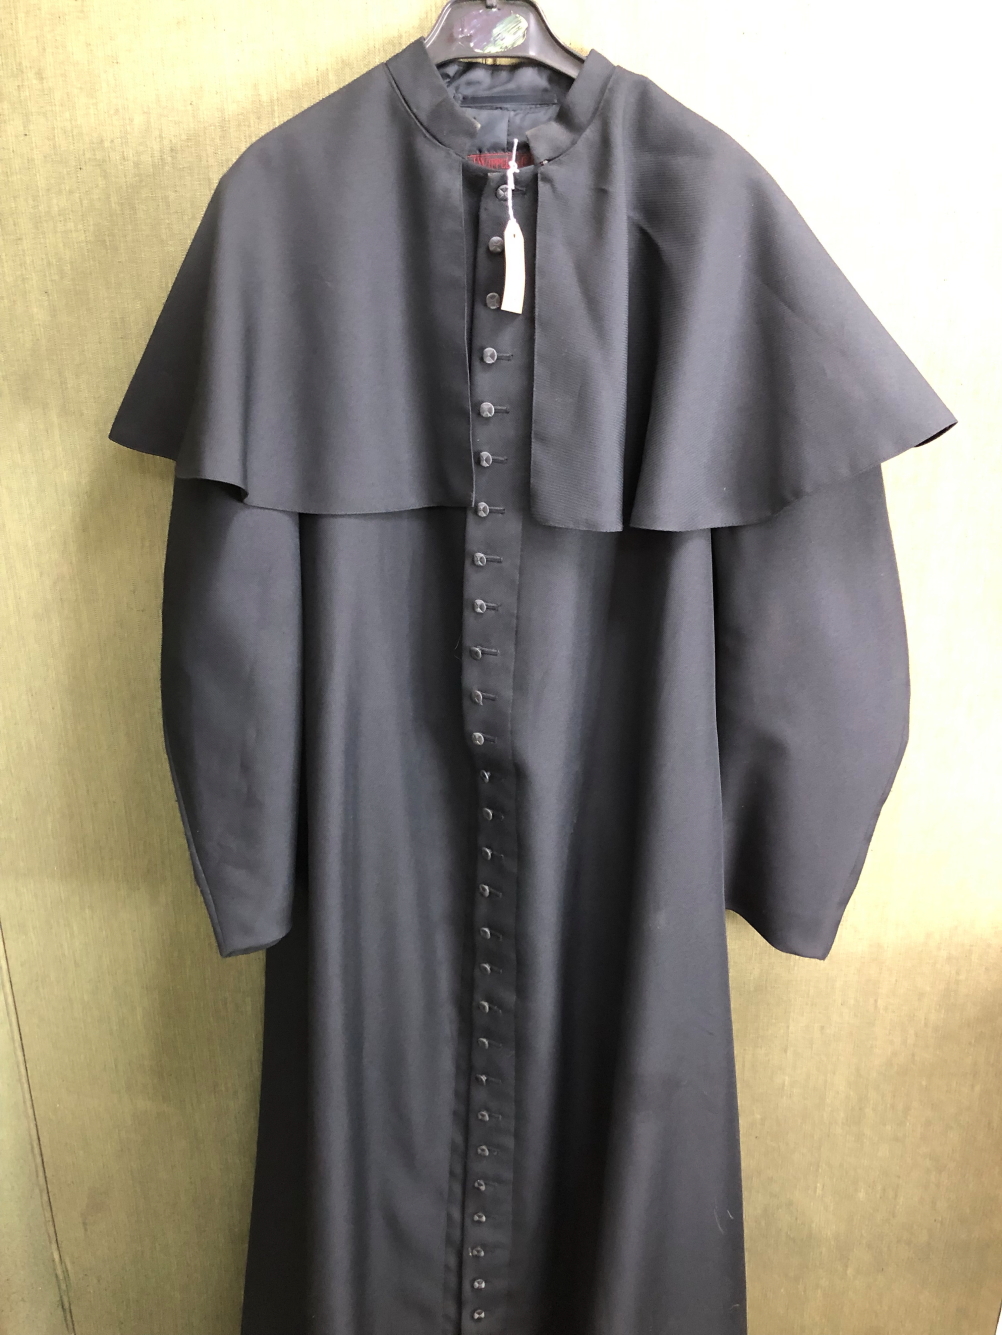 CASSOCK. A WIPPELL & CO ROMAN CATHOLIC BLACK CAPED CASSOCK. SHOULDER TO HEM 154cms.